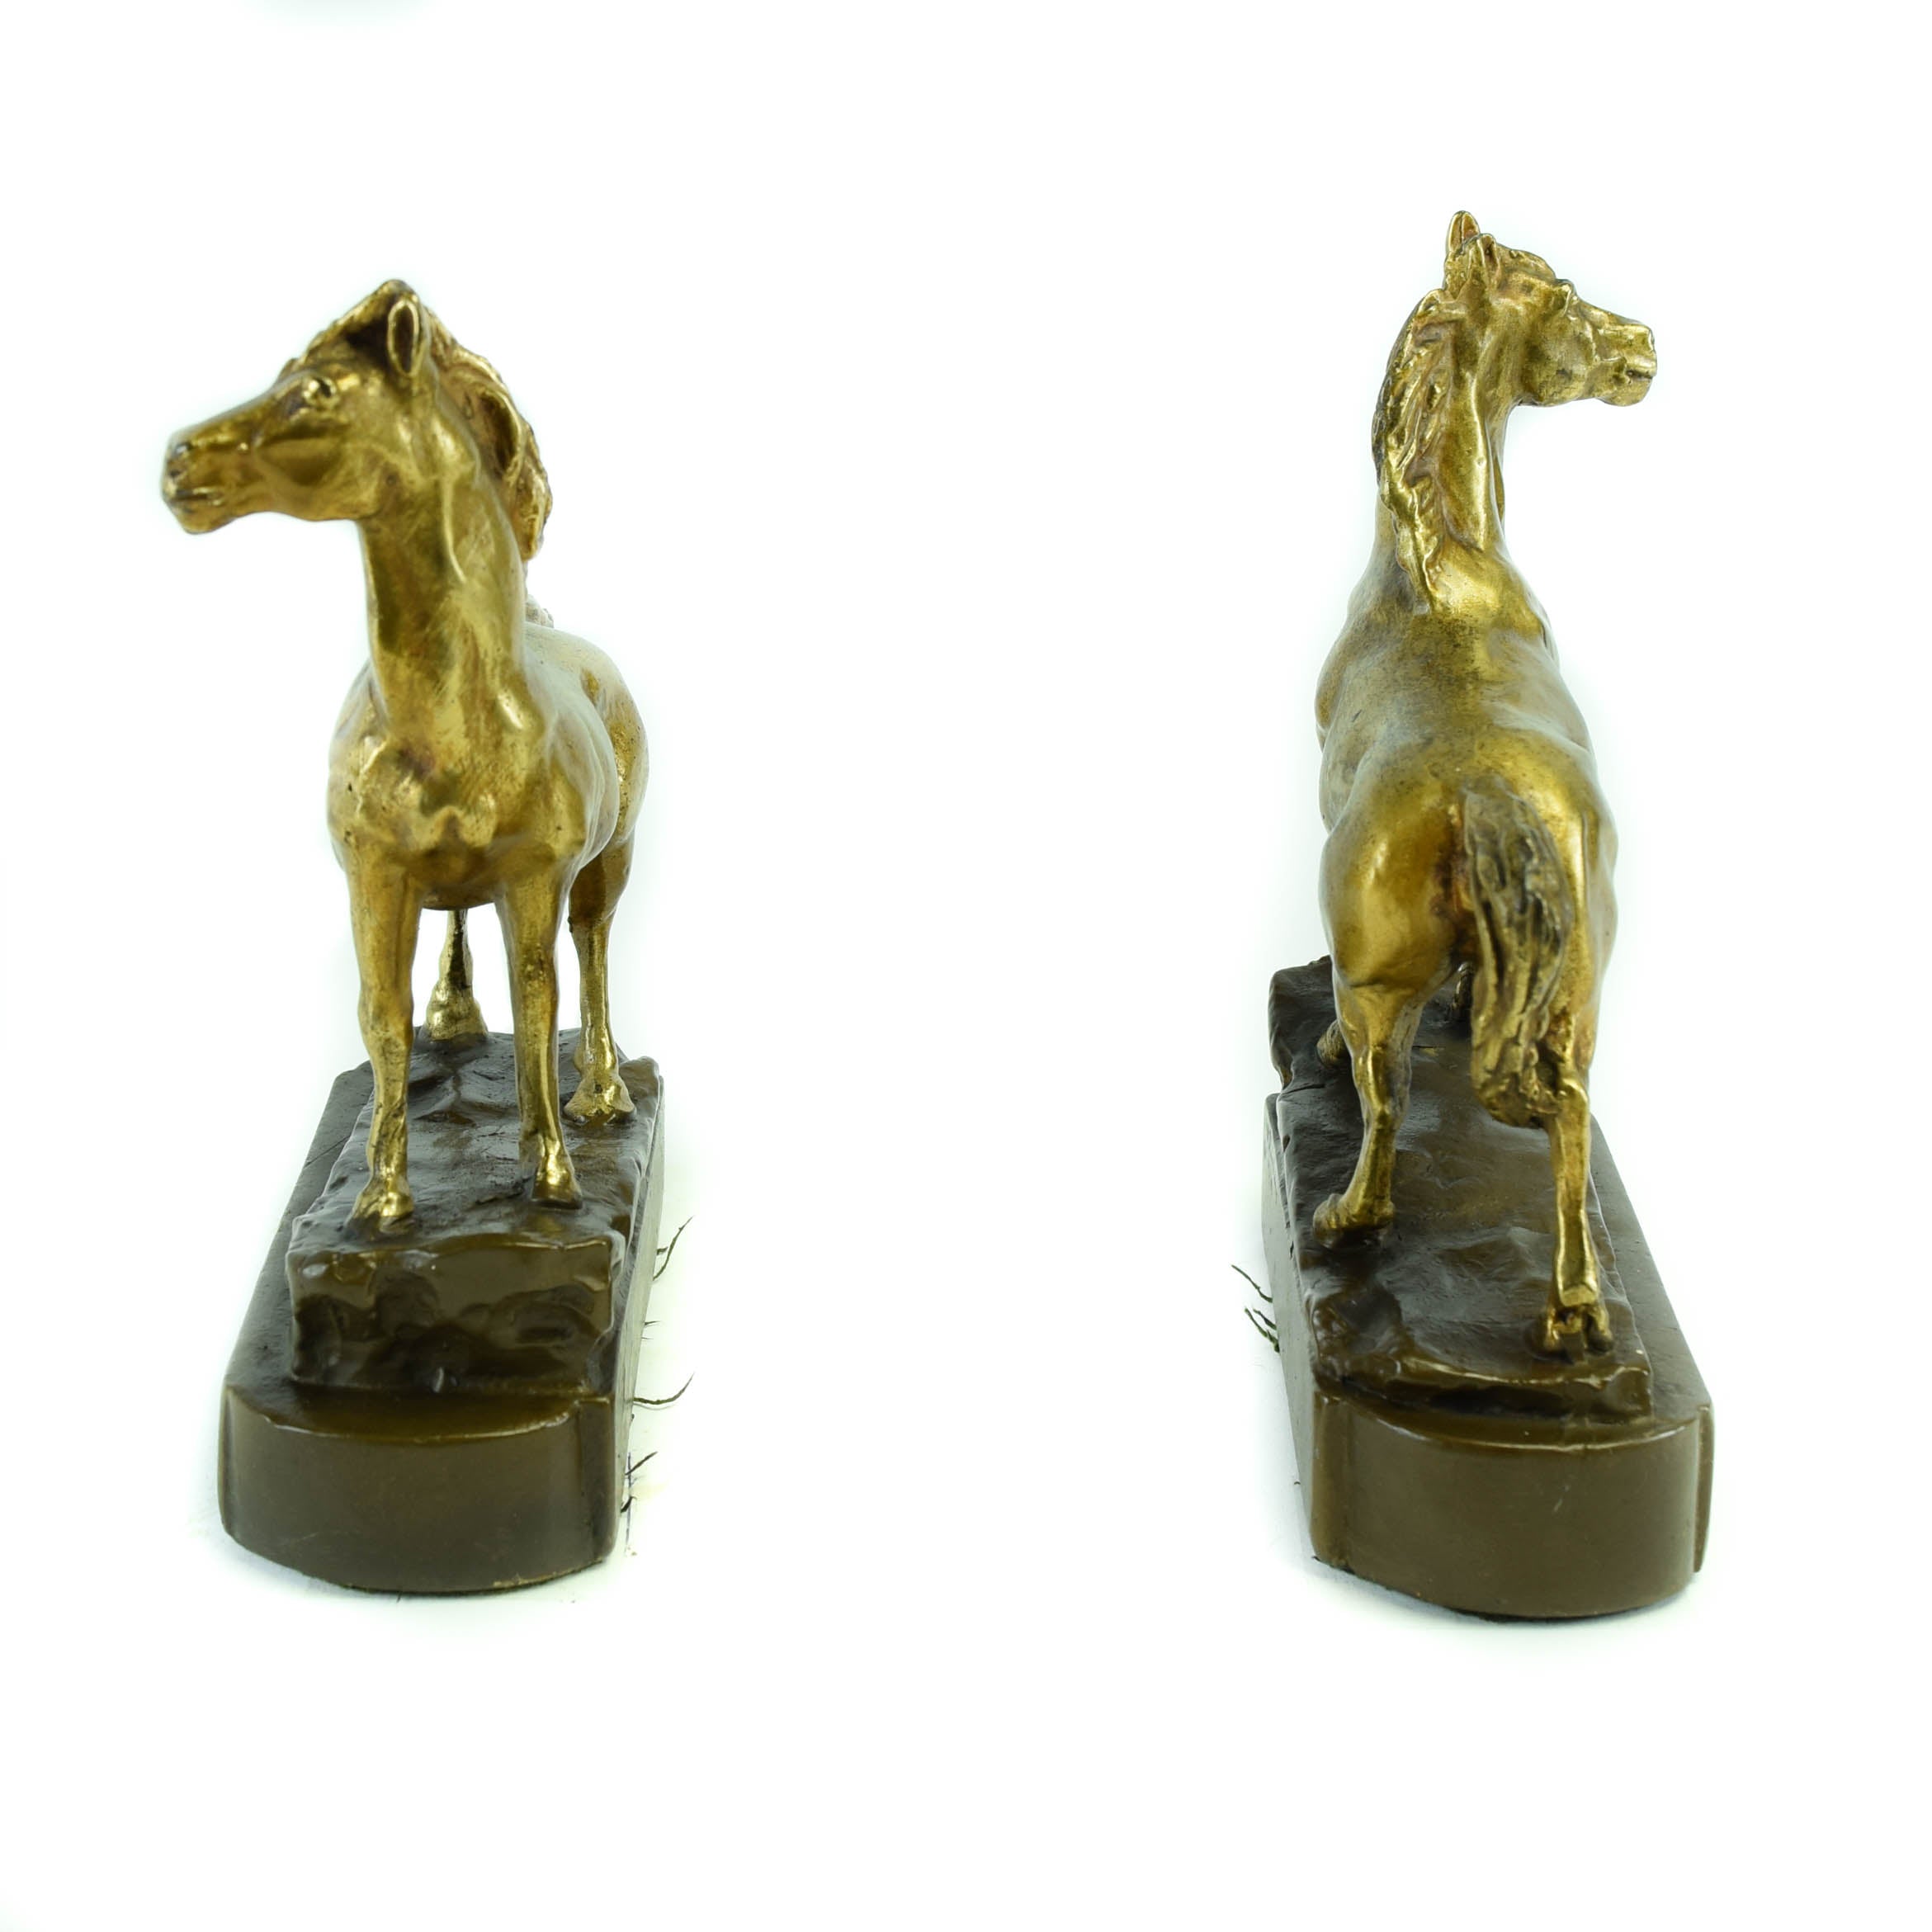 Stallion Bookends